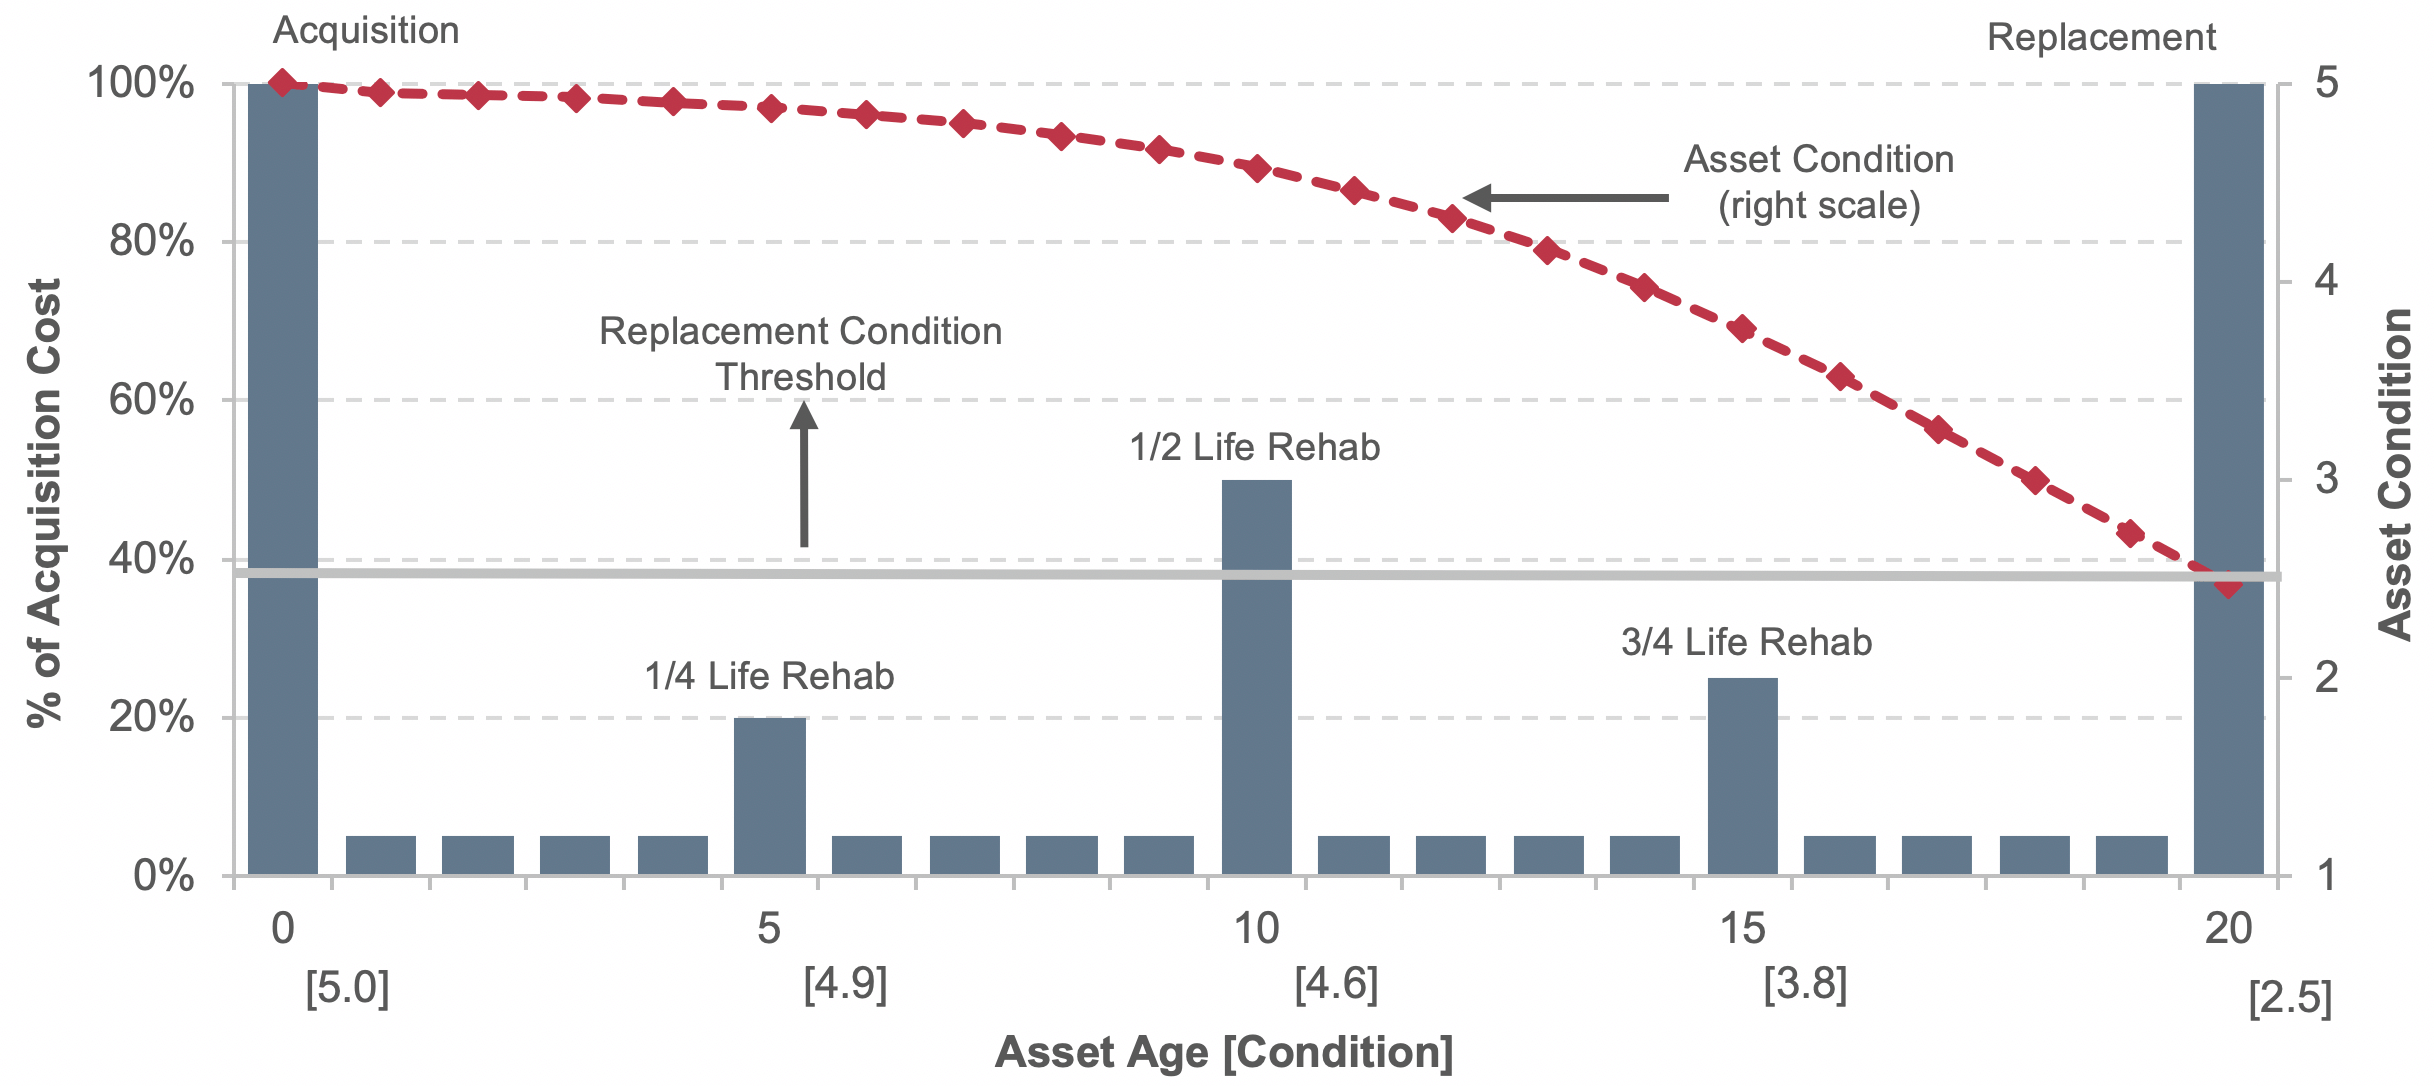 A bar chart plots percent of acquisition cost over asset age from 0 to 20 years. On the same graph, a secondary vertical axis plots a line graph of asset condition over asset age from 0 to 20 years. Asset condition follows a downward trend while percent of acquisition costs fluctuates from 0 to 20 years. Acquisition occurs at an asset age of 0 years with acquisition cost at 100 percent and an asset condition of 5.0. A quarter life rehab occurs at an asset age of 5 years with acquisition cost at roughly 20 percent and an asset condition of 4.9. A half-life rehab occurs at an asset age of 10 years with acquisition cost at roughly 50 percent and an asset condition of 4.9. A three-quarter life rehab occurs at an asset age of 15 years with acquisition cost at roughly 25 percent and an asset condition of 3.8. Replacement occurs at an asset age of 20 years with acquisition cost back to 100 percent and an asset condition of 2.5. The graph also shows the replacement condition threshold at an asset condition of 2.5.